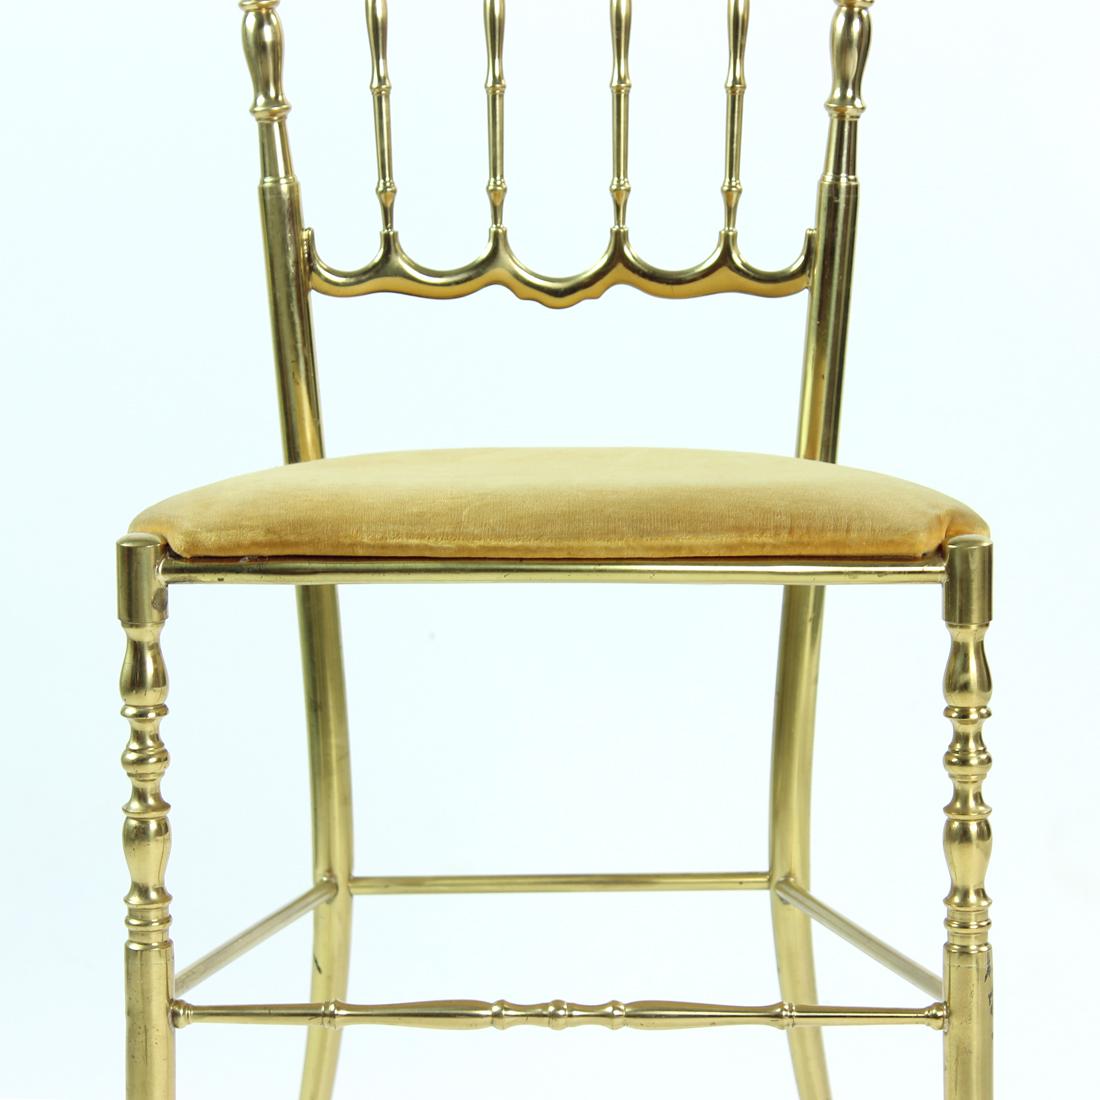 Beautiful mid-century Italian brass Chiavari spindle back chairs with padded seats upholstered in golden gobelin fabric. These polished brass chairs are designed by Giuseppe Gaetano Descalzi for Chiavari, named after the Italian city where they